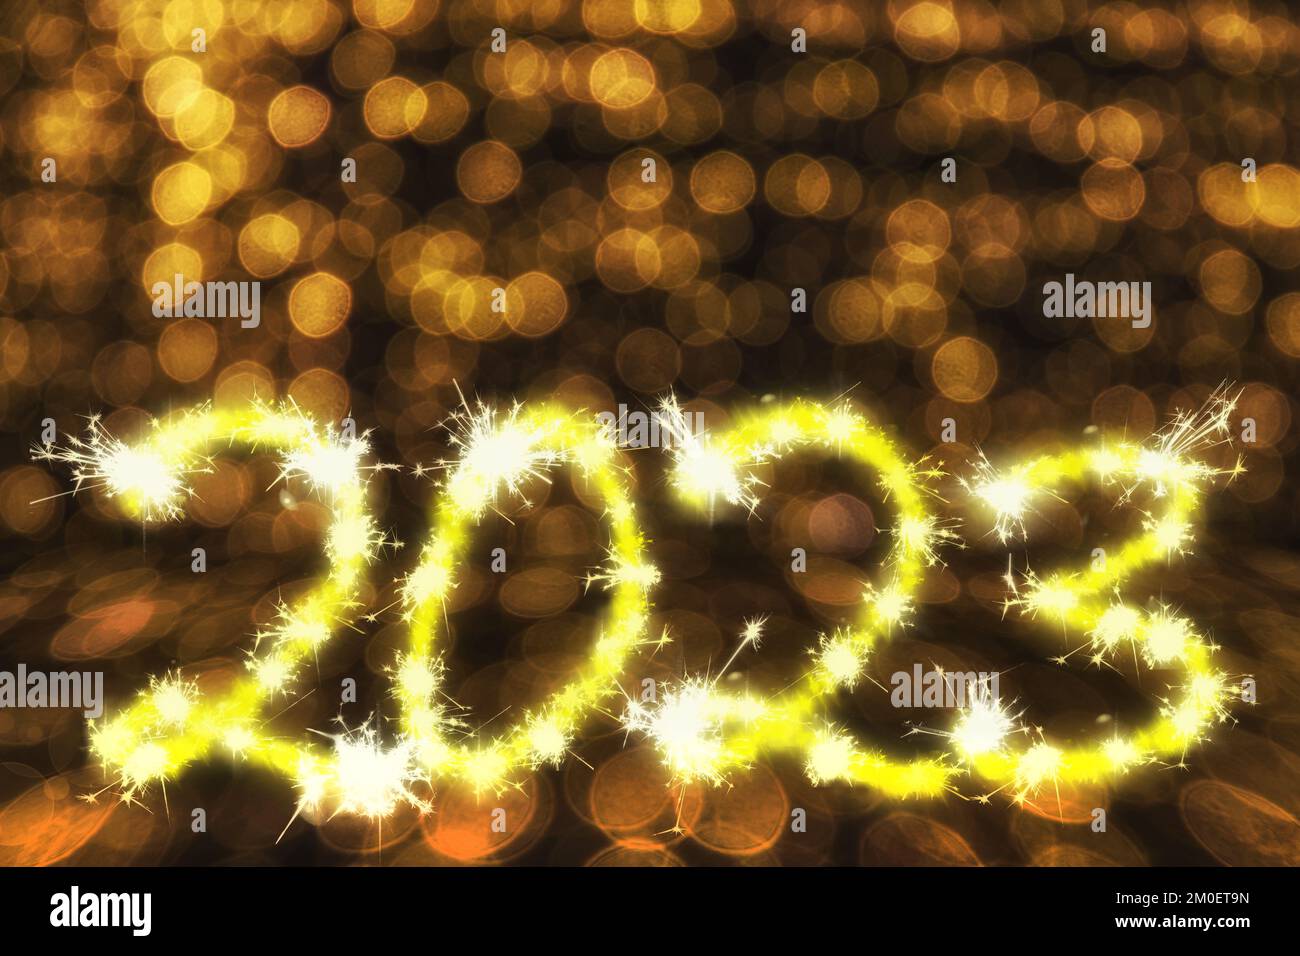 The year 2023 with text free space as background for New Year's Eve as 3d rendered illustration Stock Photo